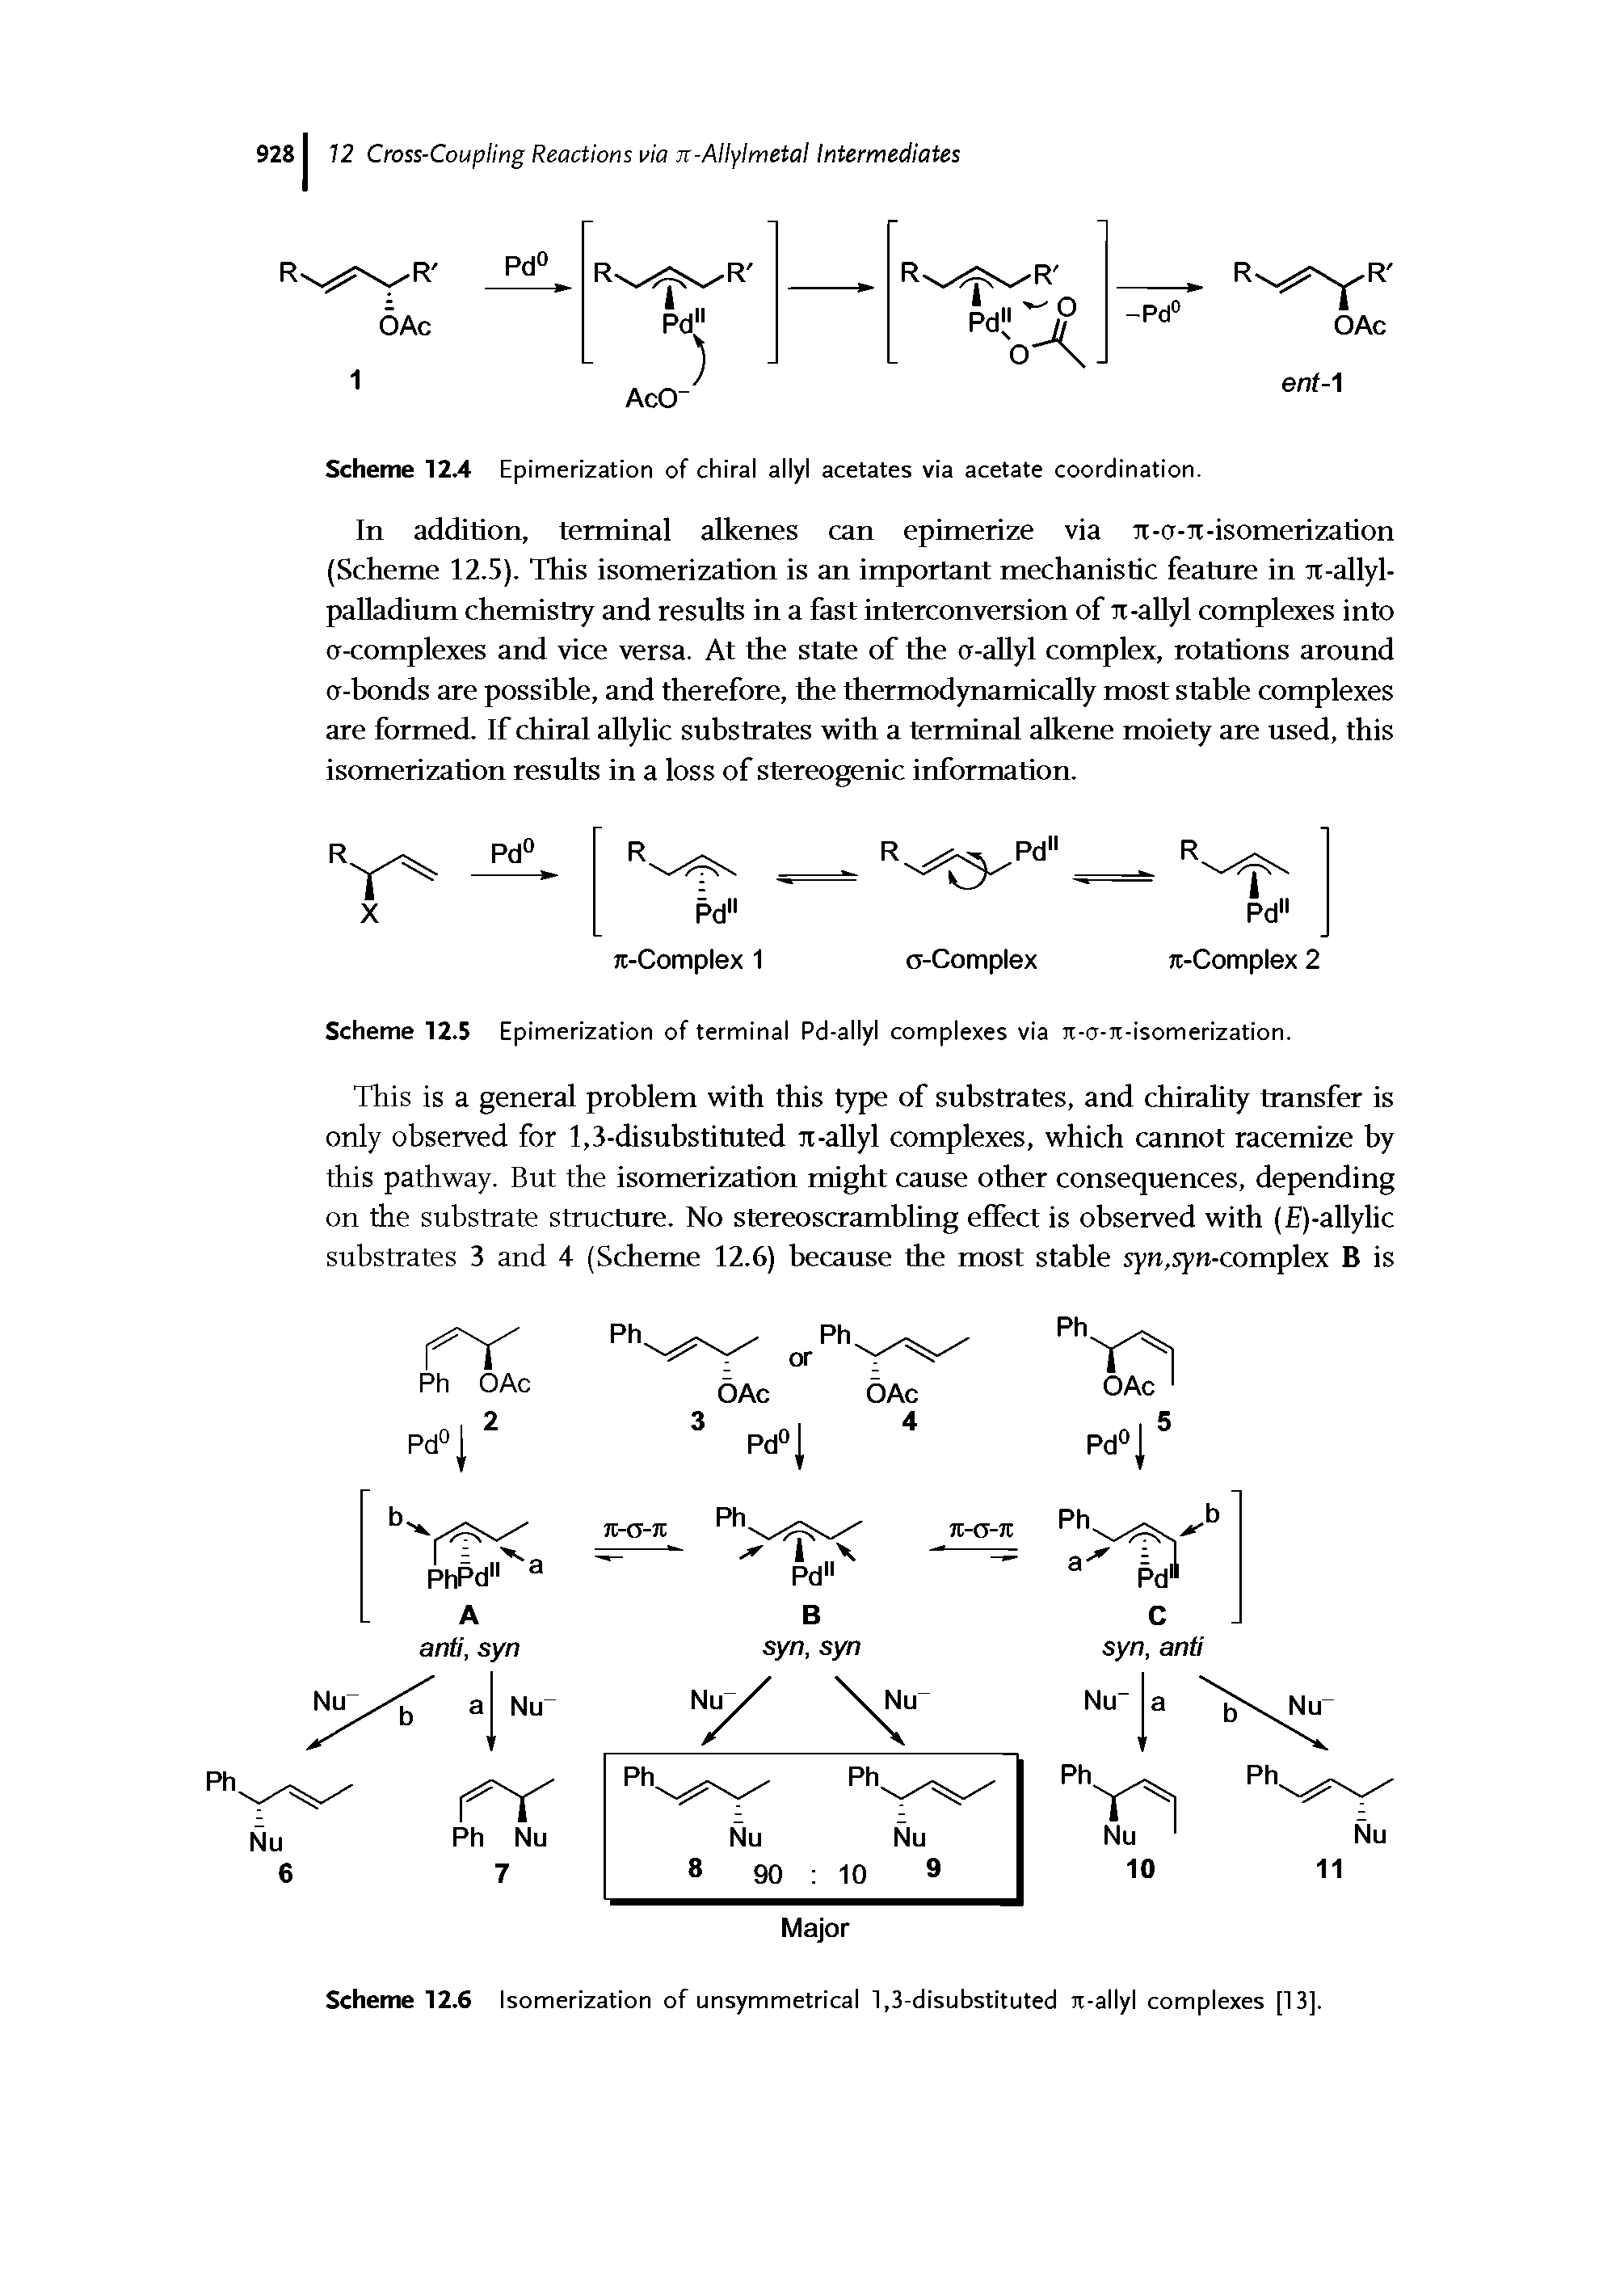 Scheme 12.6 Isomerization of unsymmetrical 1,3-disubstituted Jt-allyl complexes [13].